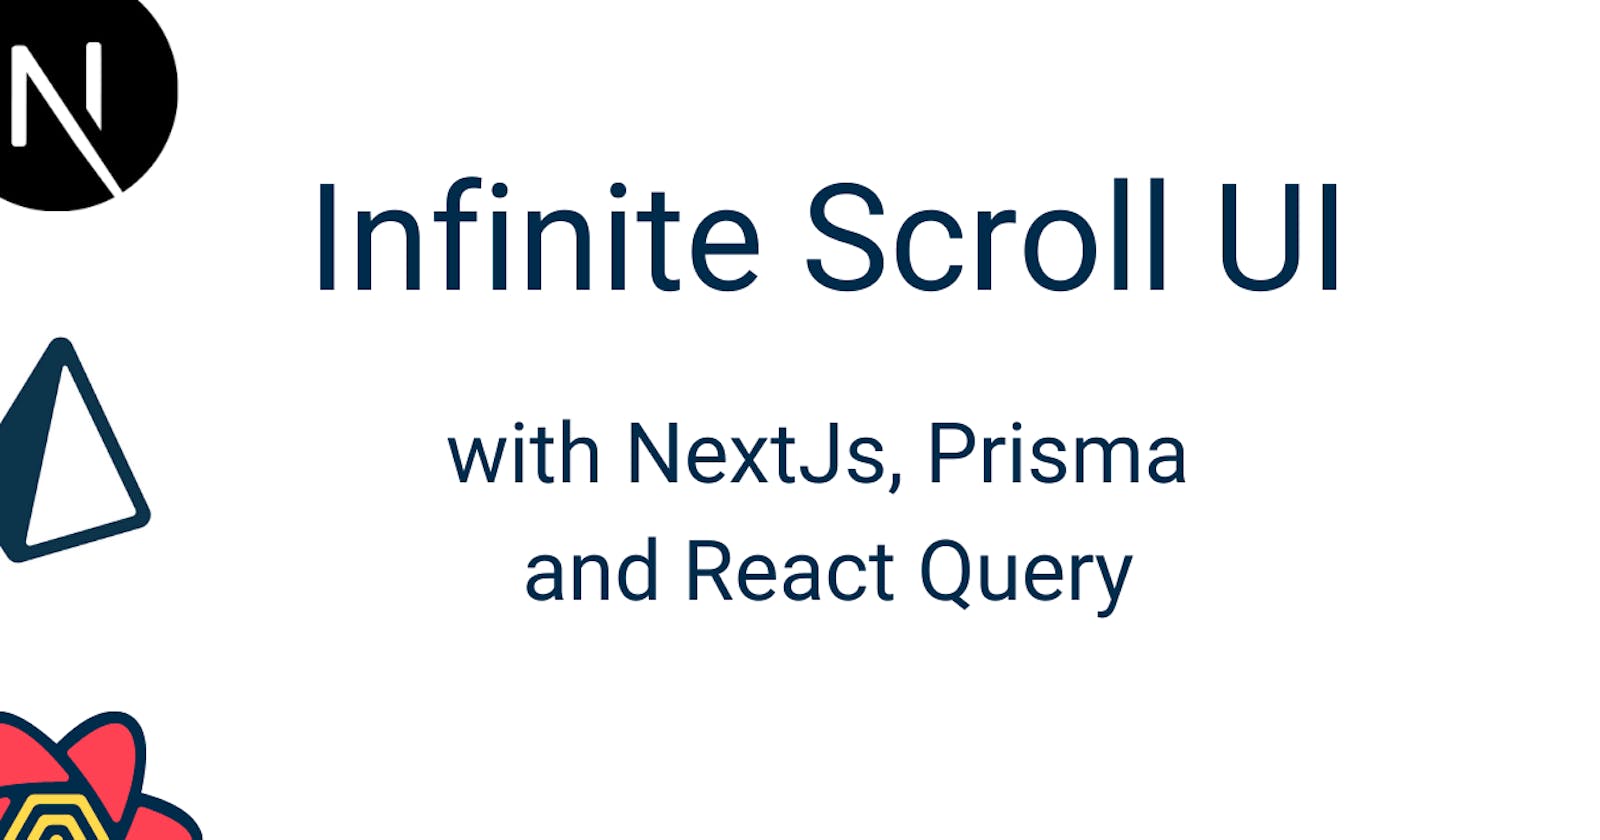 Implementing Infinite scroll using NextJS, Prima, and React-Query